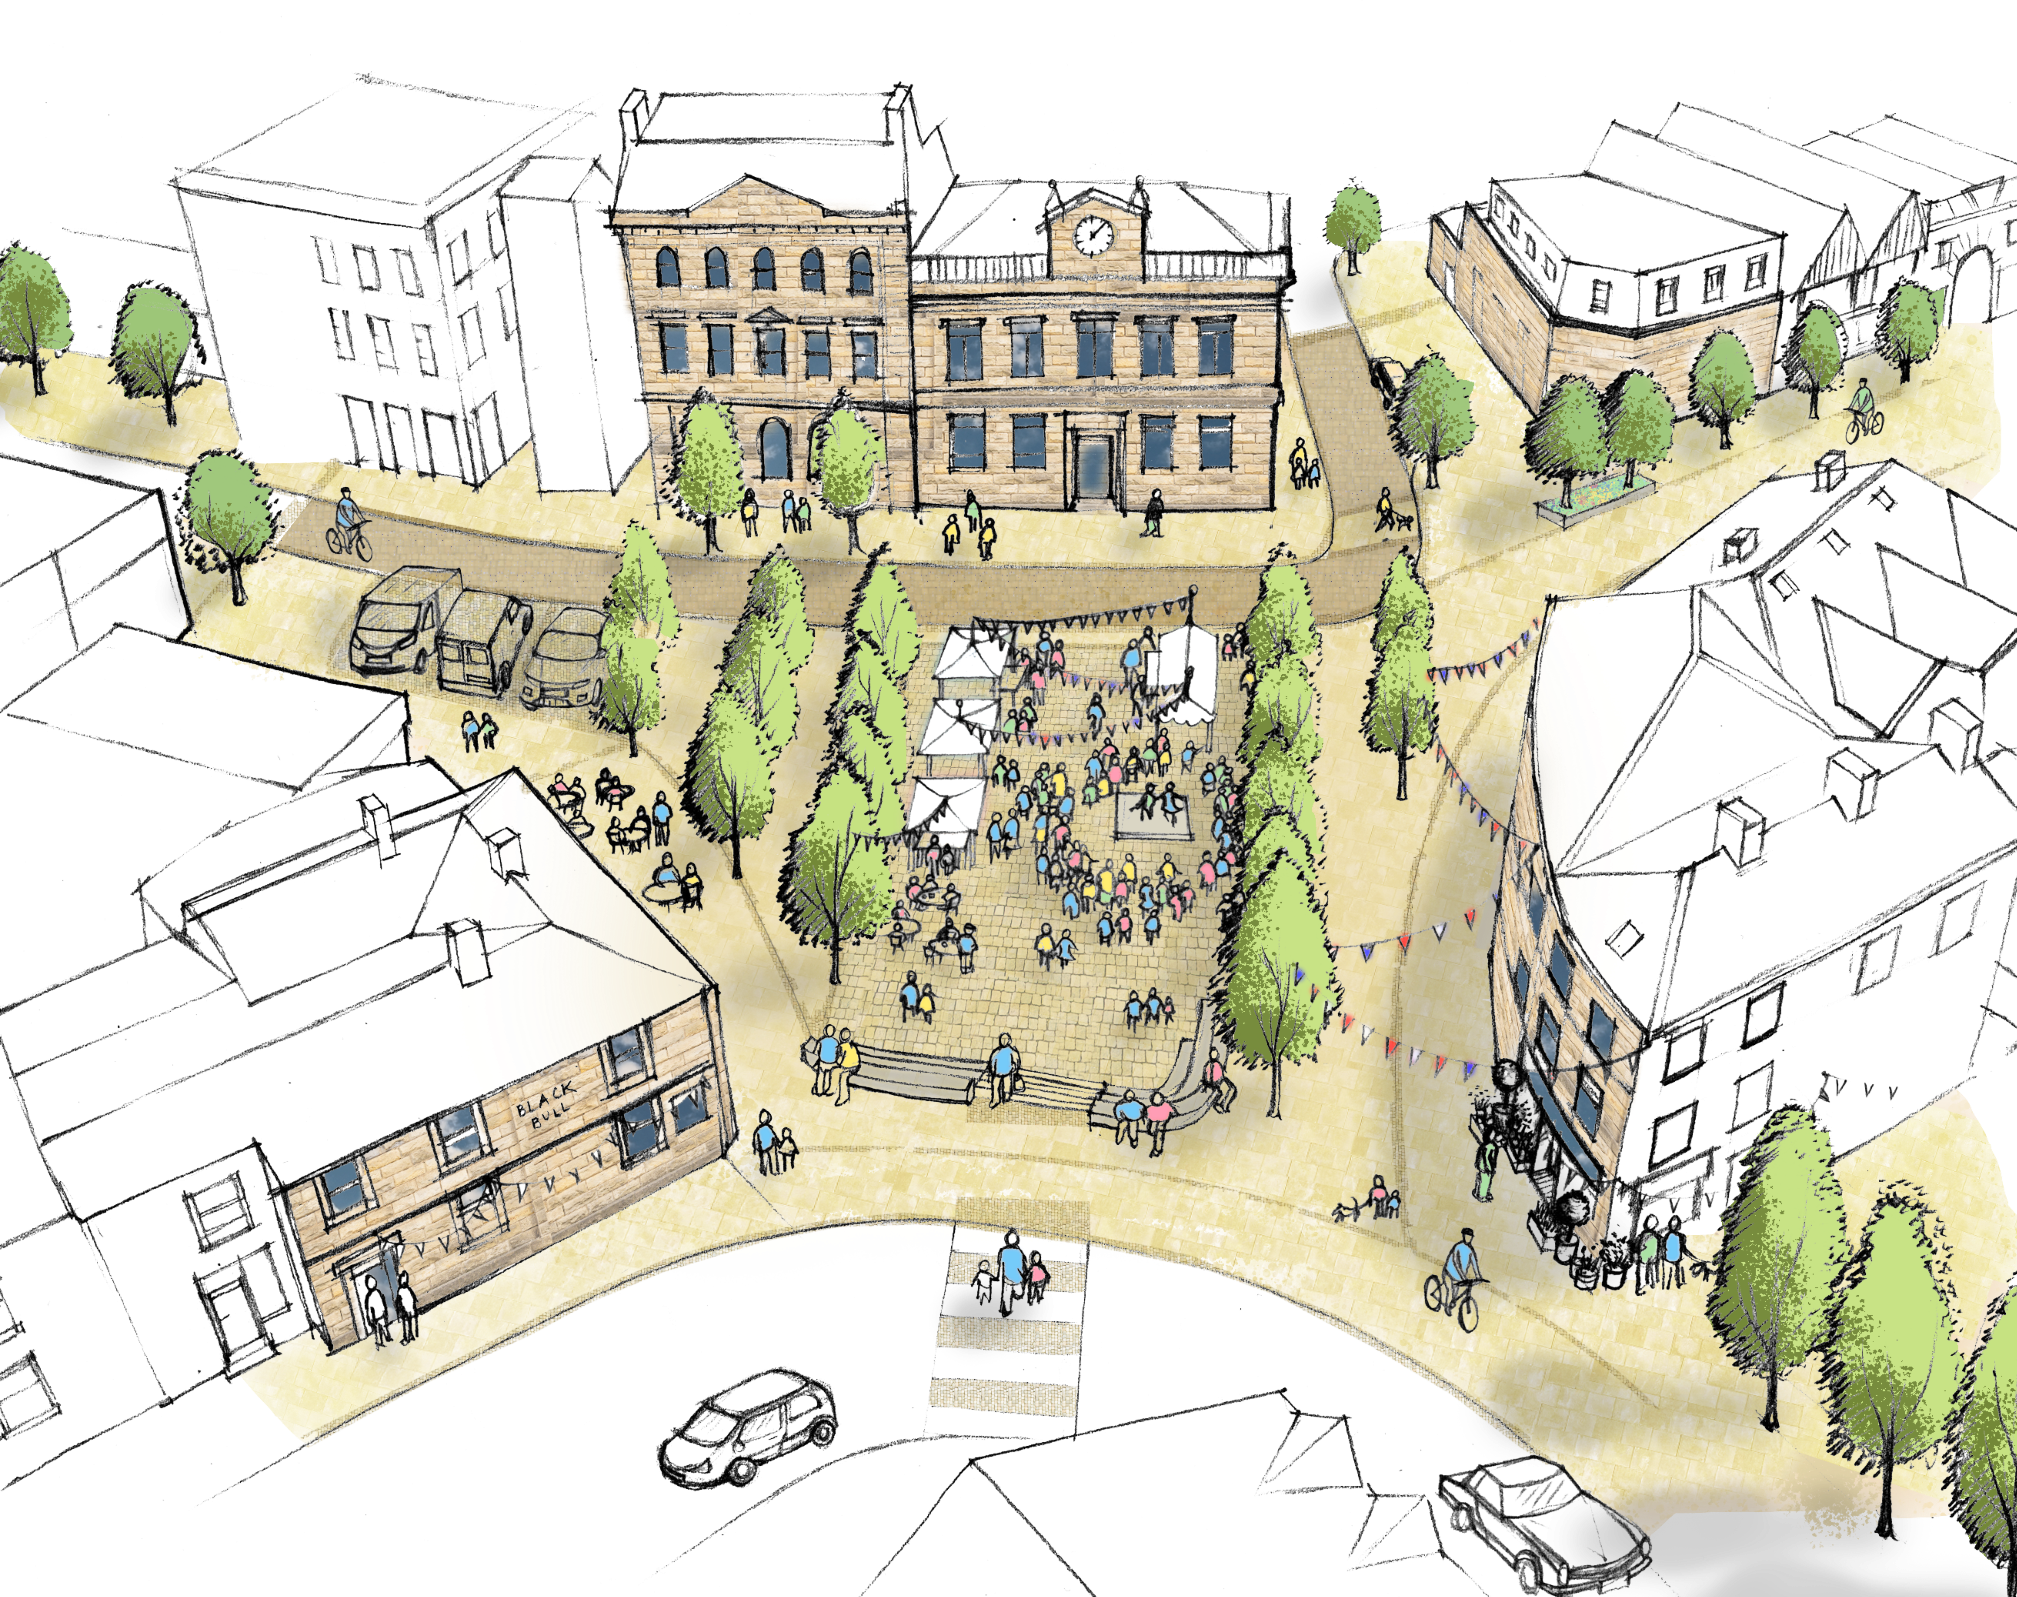 Thornton Square Brighouse proposal